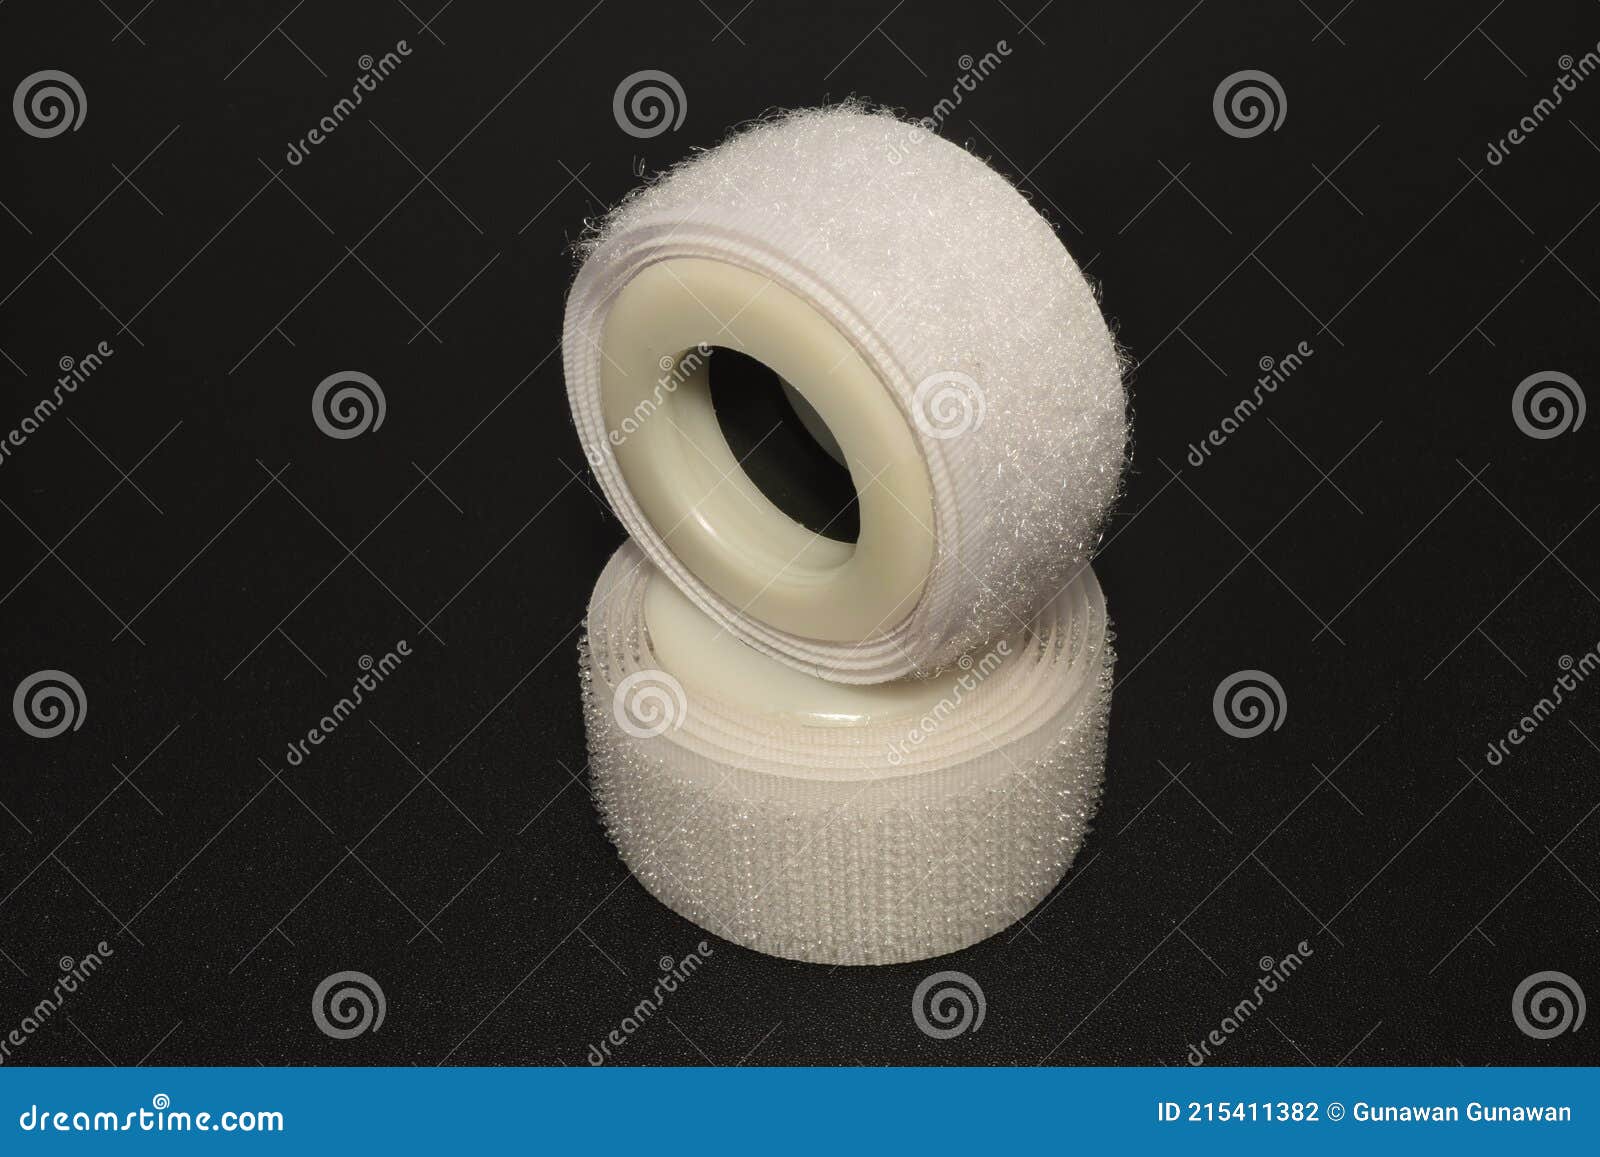 Velcro Tape in a Roll Closeup Stock Photo - Image of furry